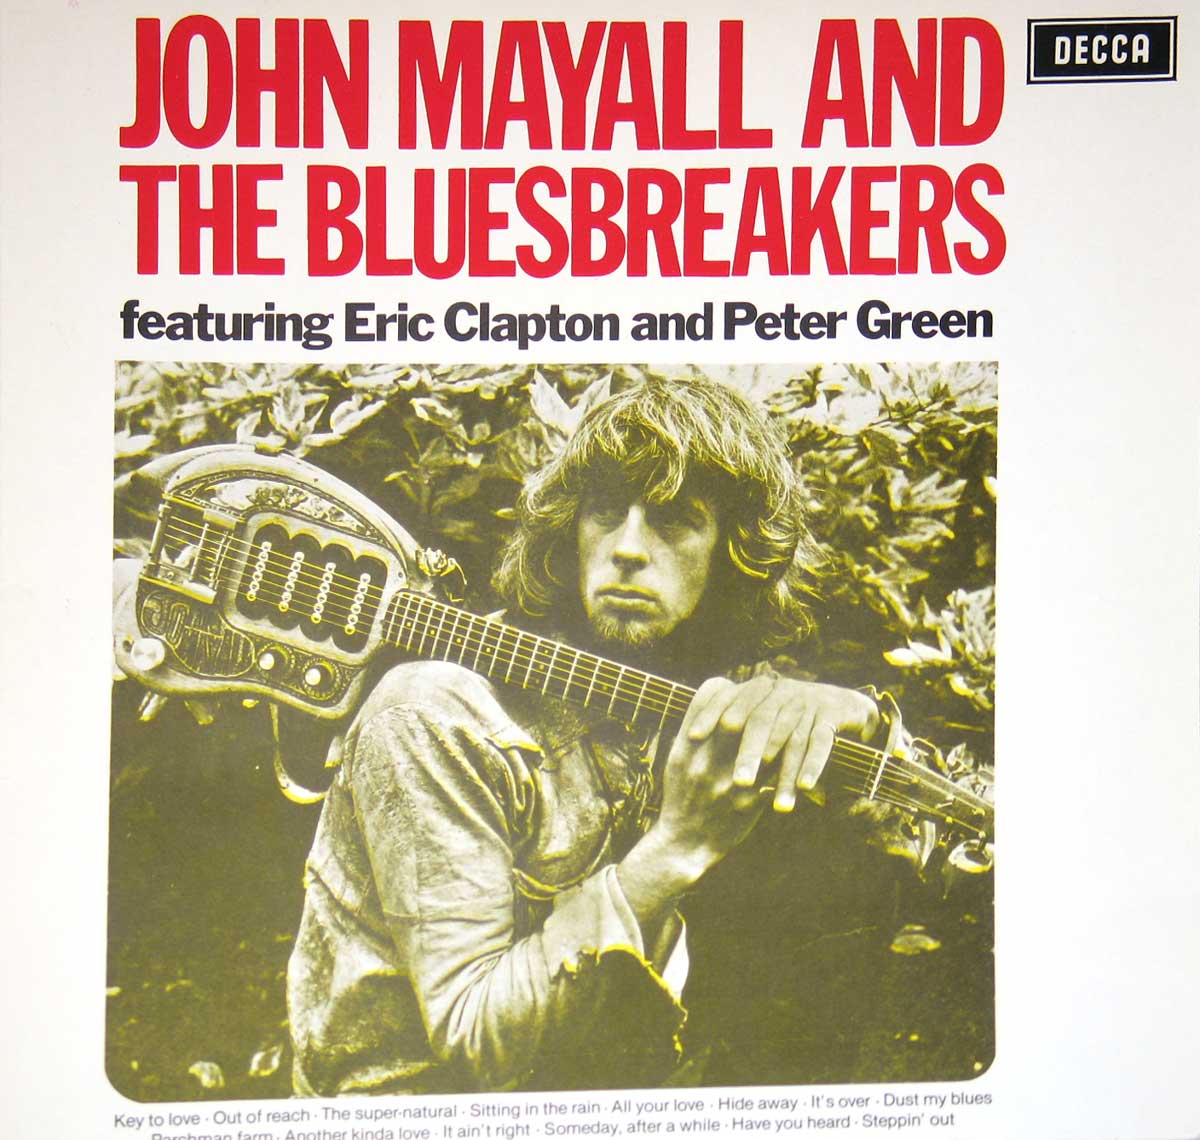 Album Front Cover Photo of John Mayall & The Bluesbreakers Featuring Eric Clapton & Peter Green 